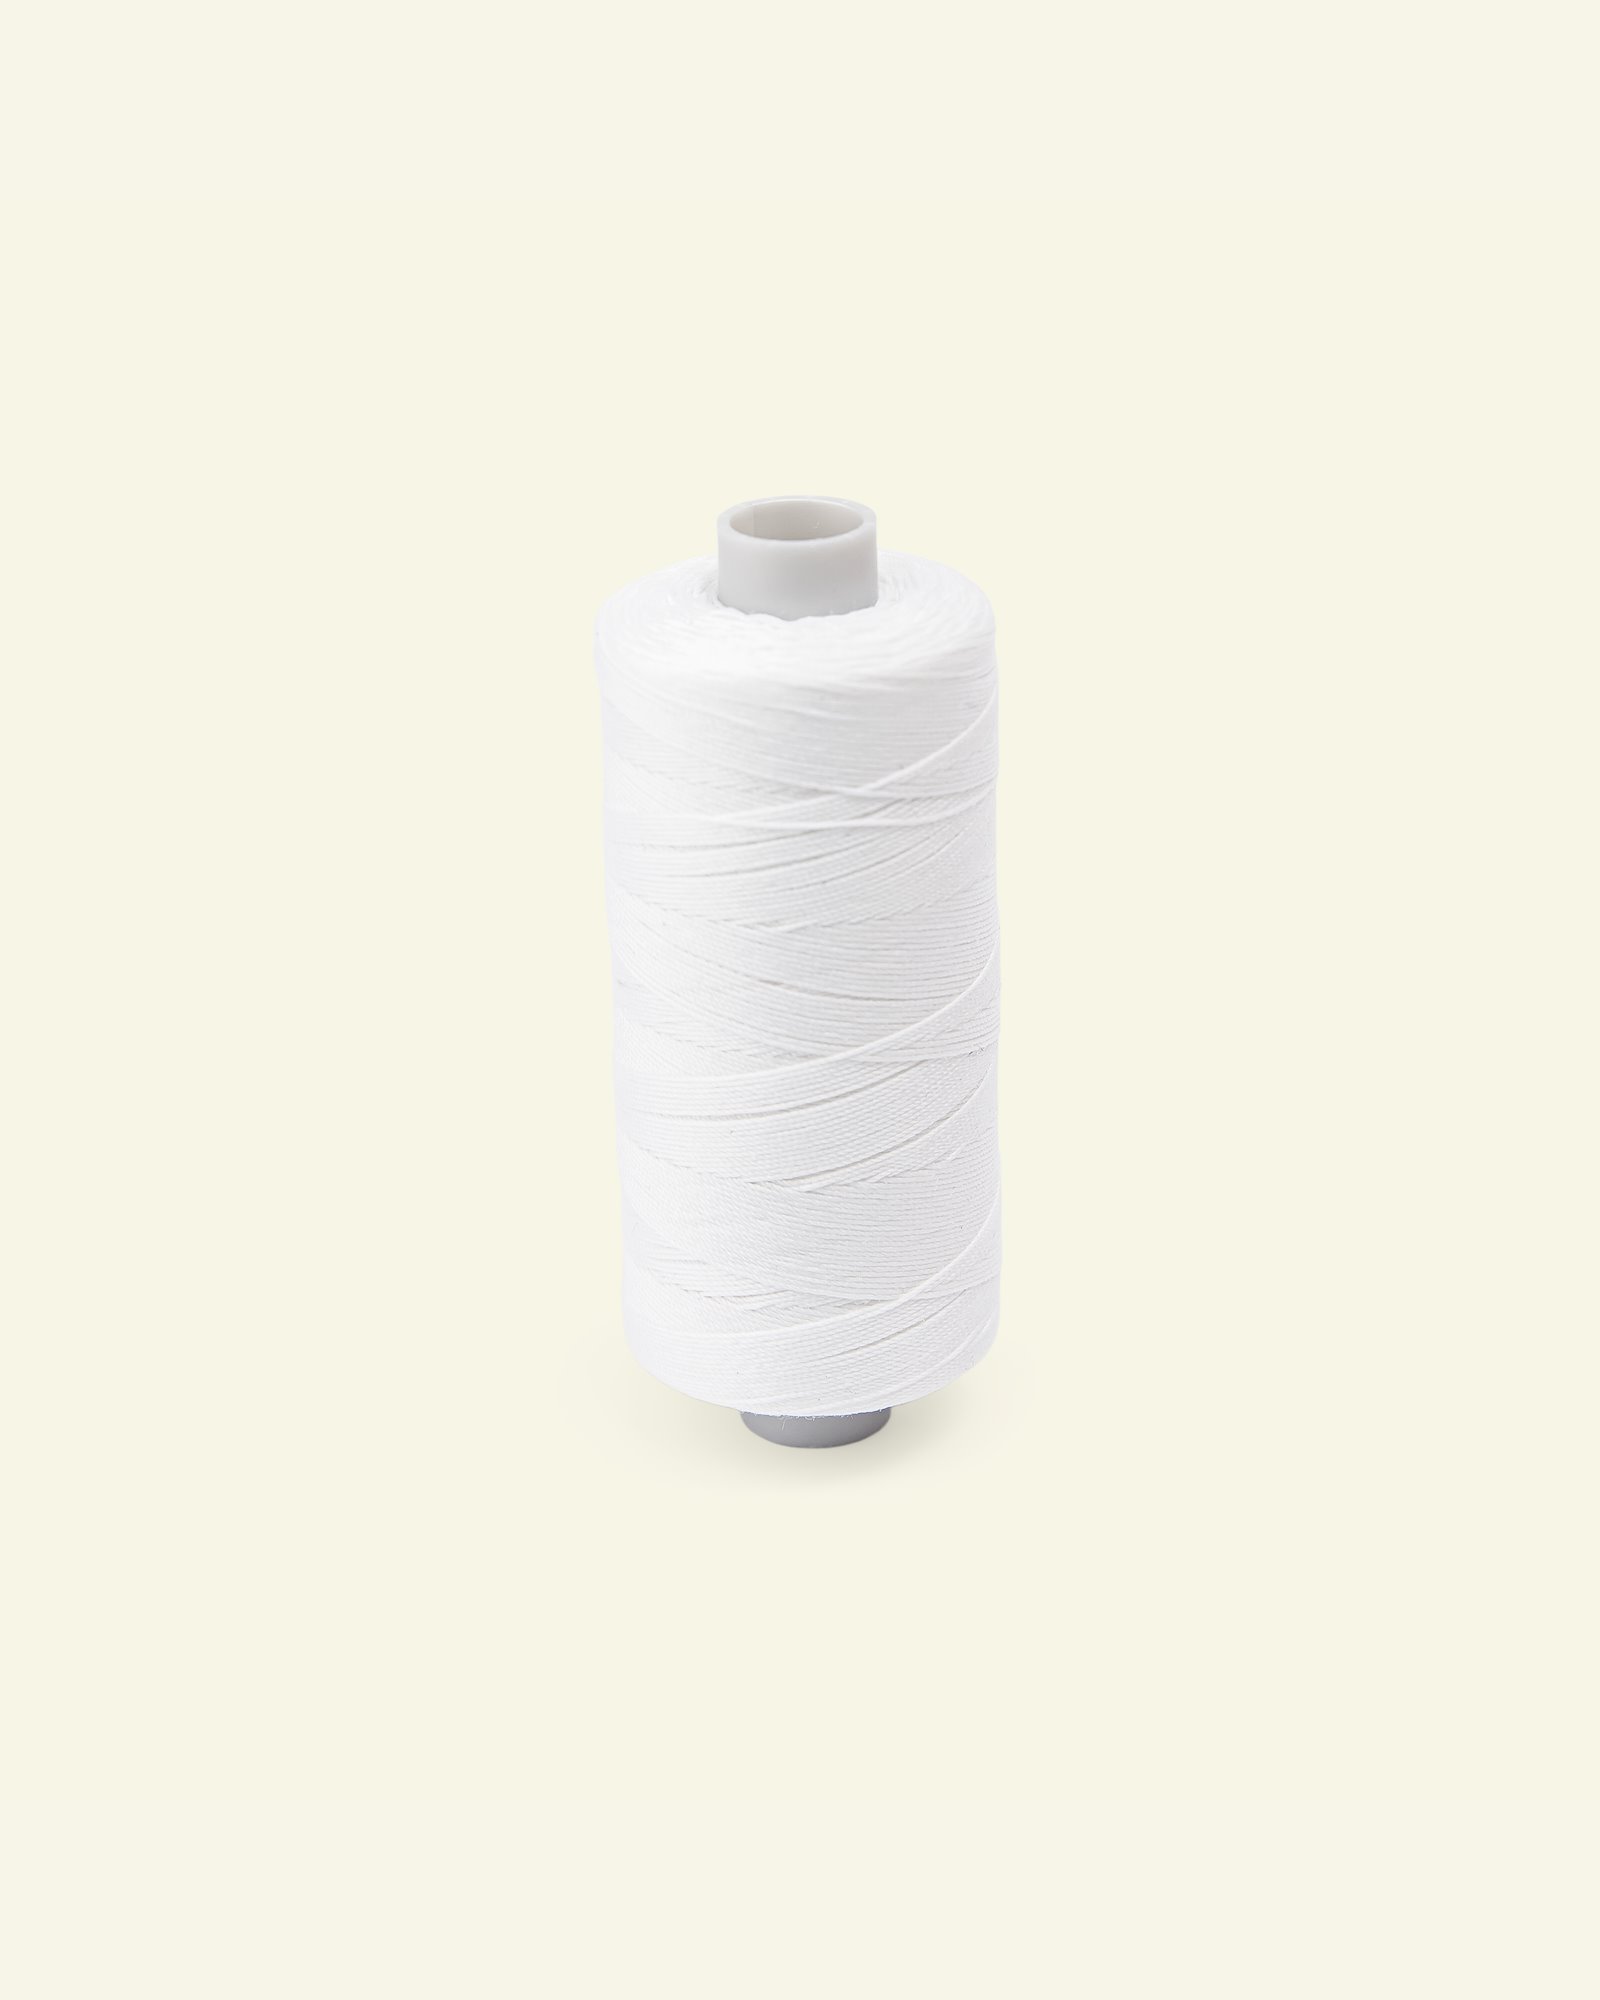 Get premium quality Heavy upholstery thread here